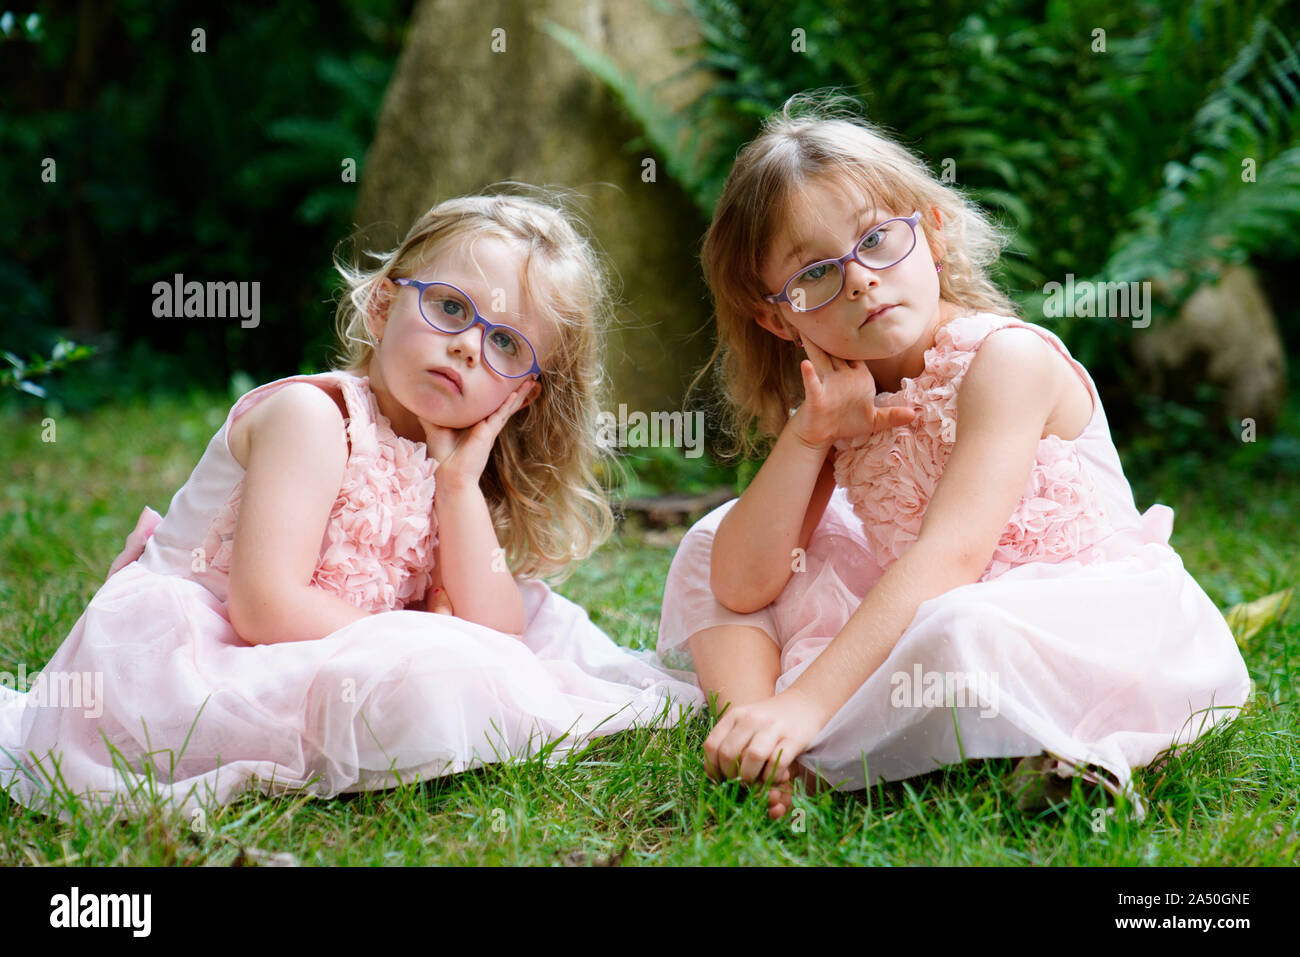 6 years old, 3 years old, Two Girls Siblings, Portrait, Karlovy Vary, Czech Republic Stock Photo